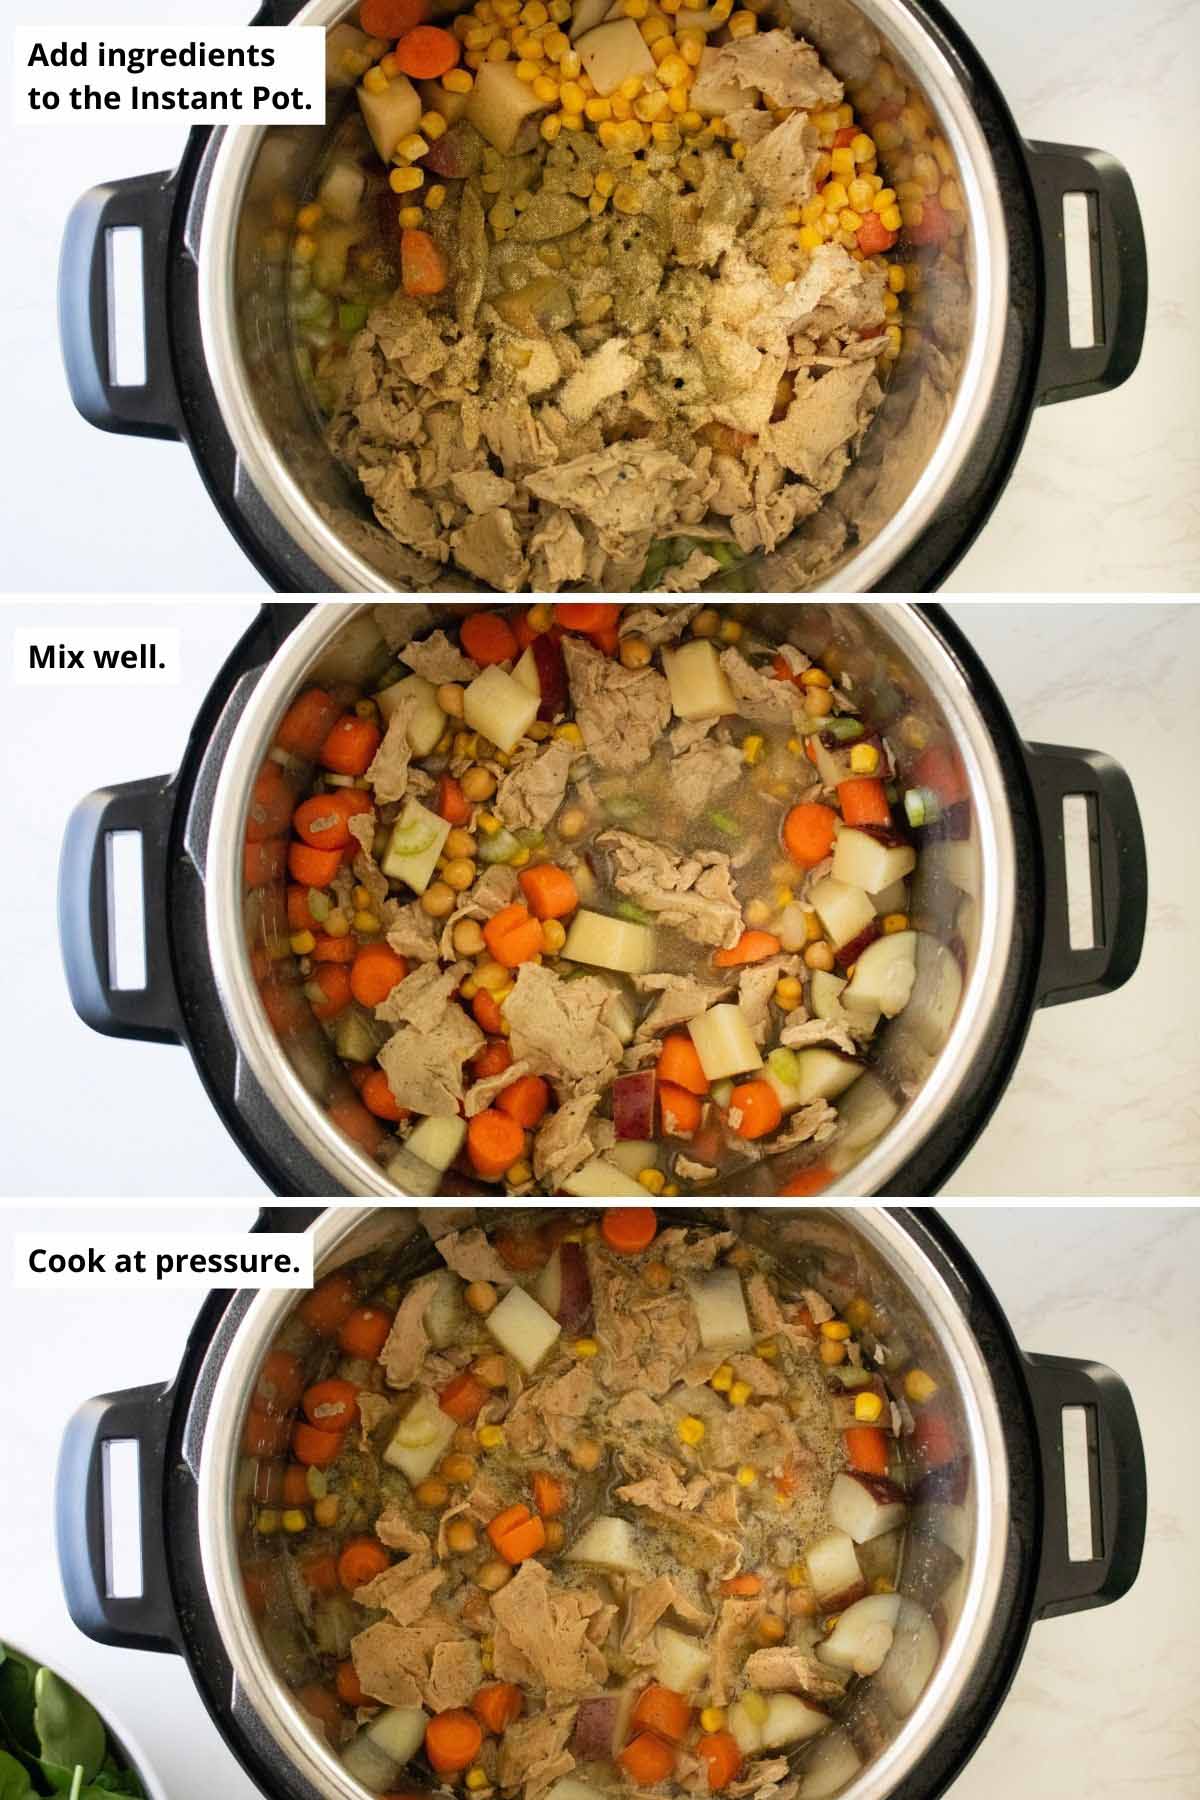 image collage showing stew ingredients in the Instant Pot before and after mixing and after cooking at pressure